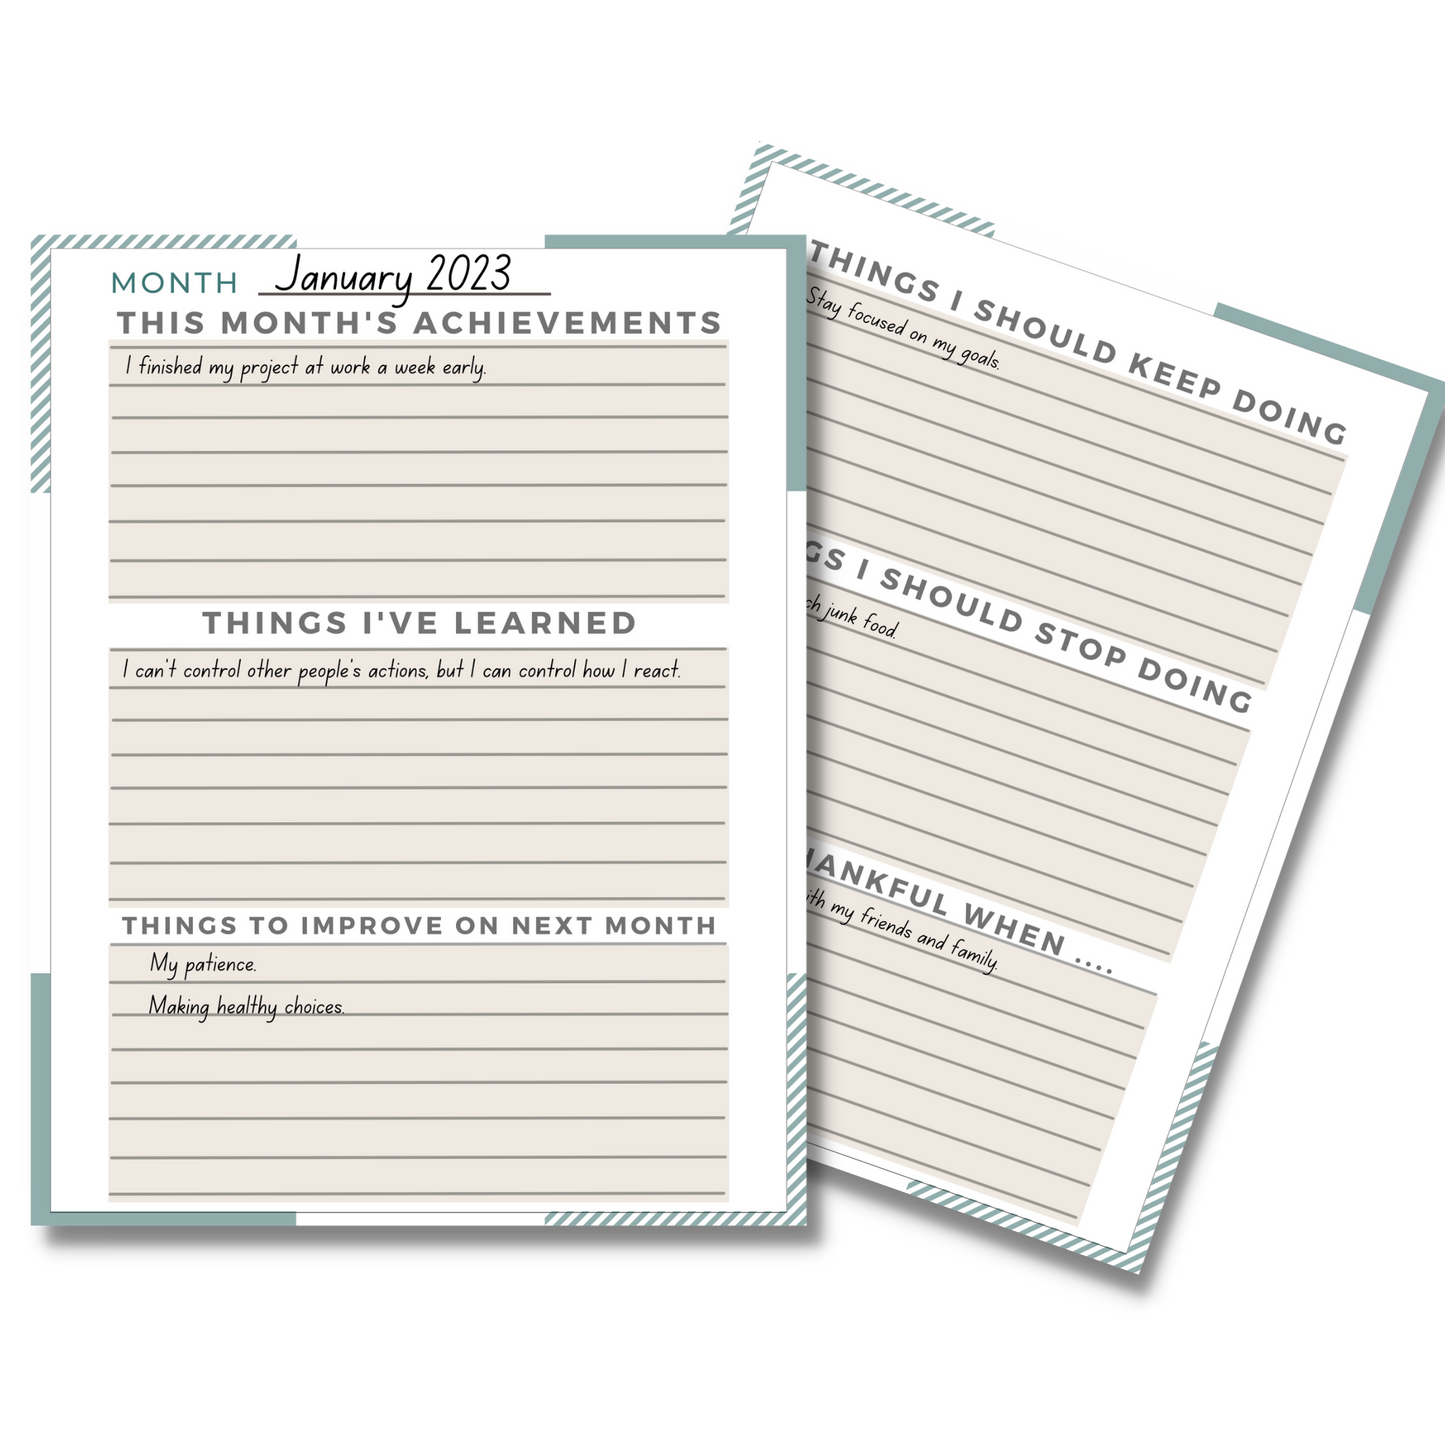 monthly and weekly planner